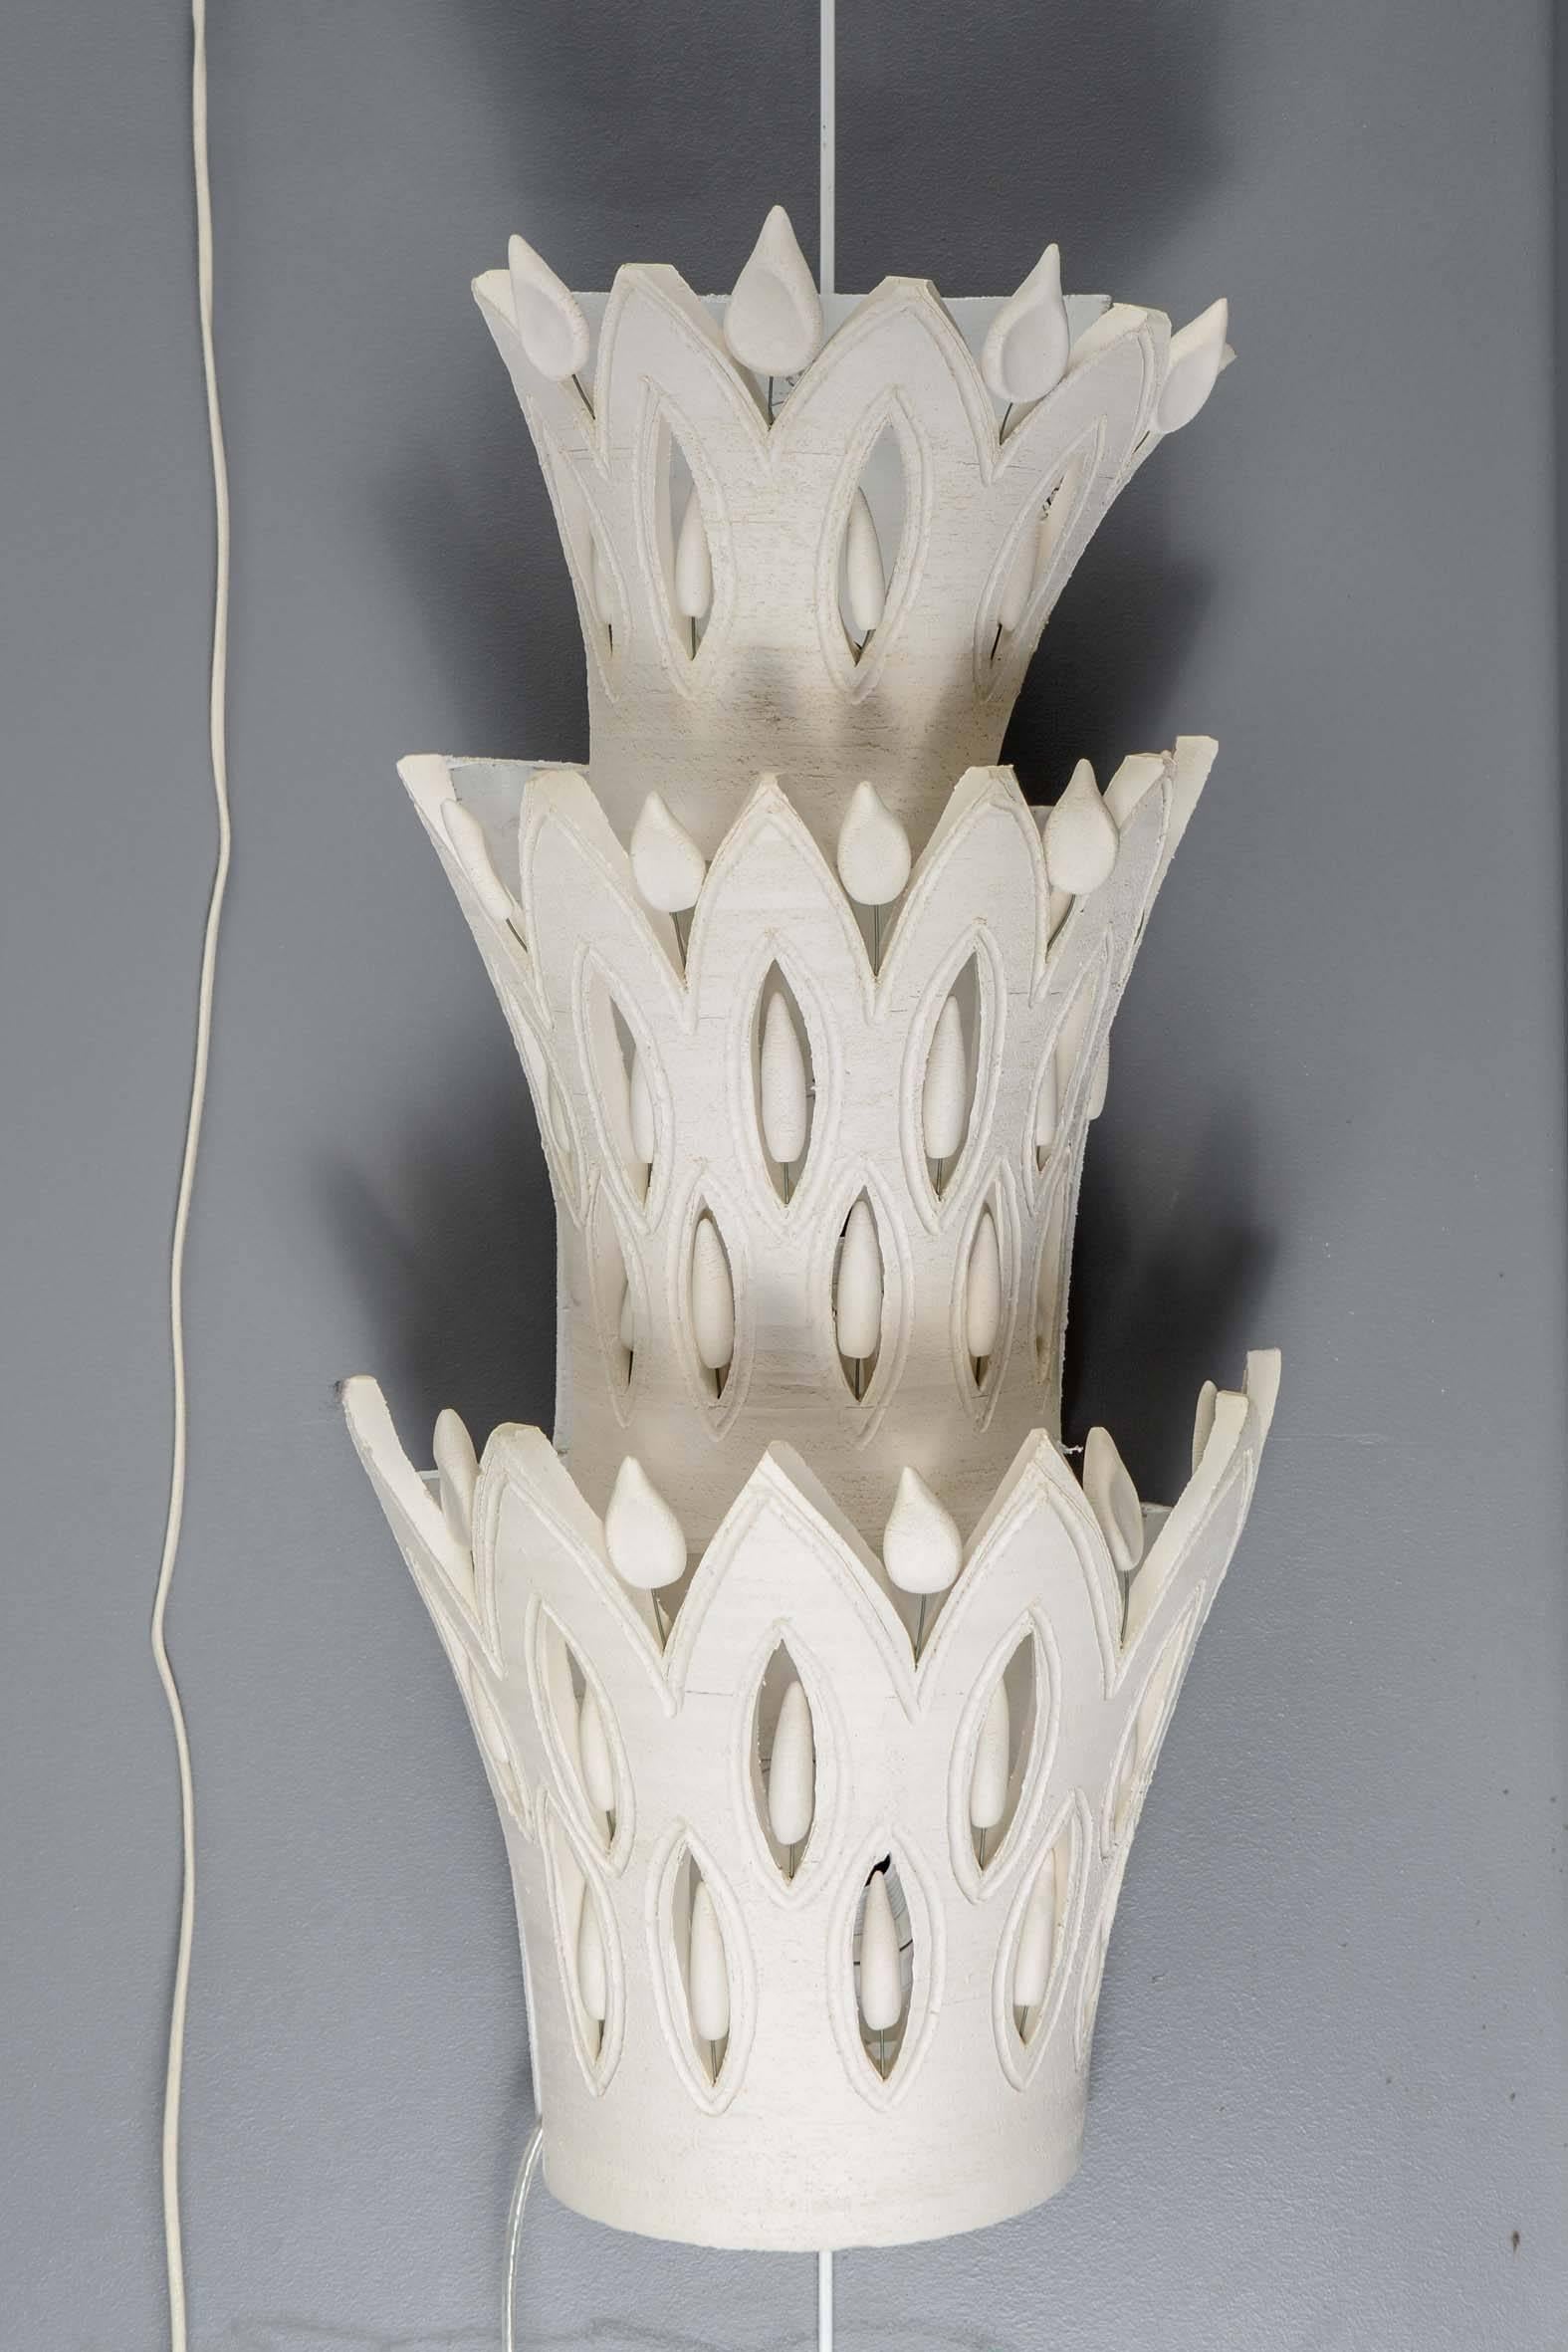 Pair of beautiful ceramic wall sconces by Georges Pelletier.

Three stacked ceramic sconces on painted wood panel.